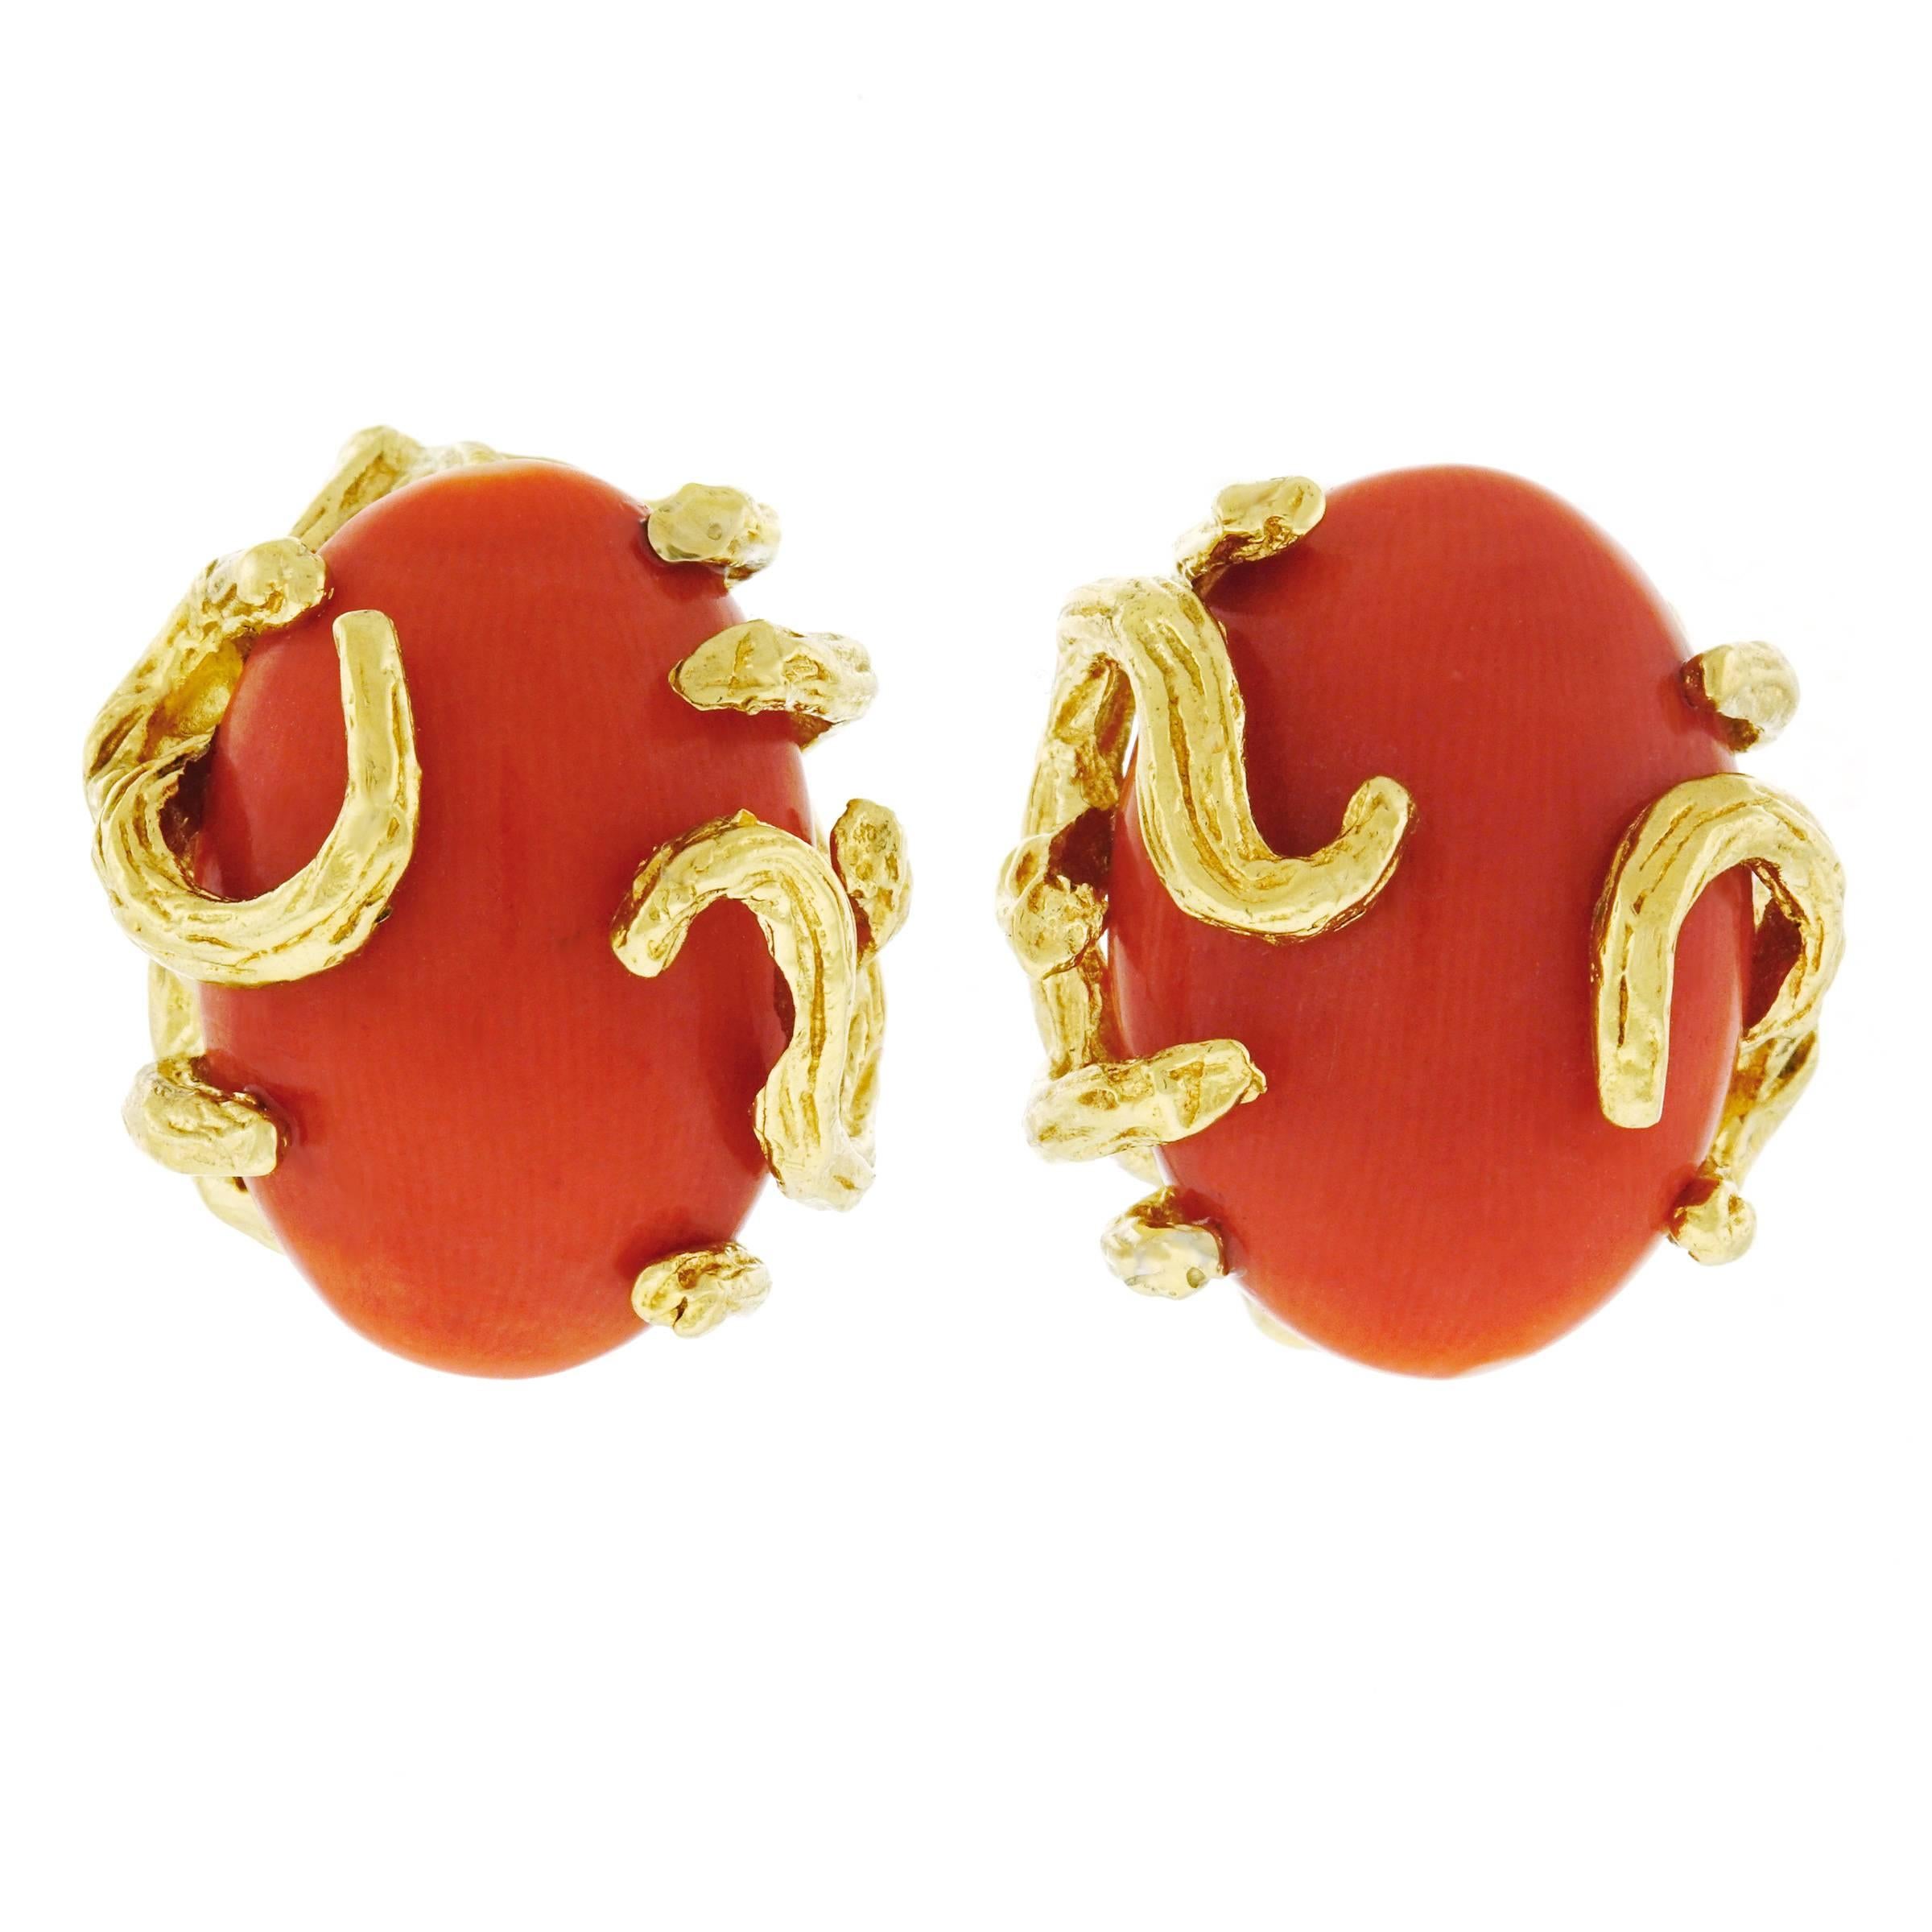 1960s Modernist Coral and Gold Earrings